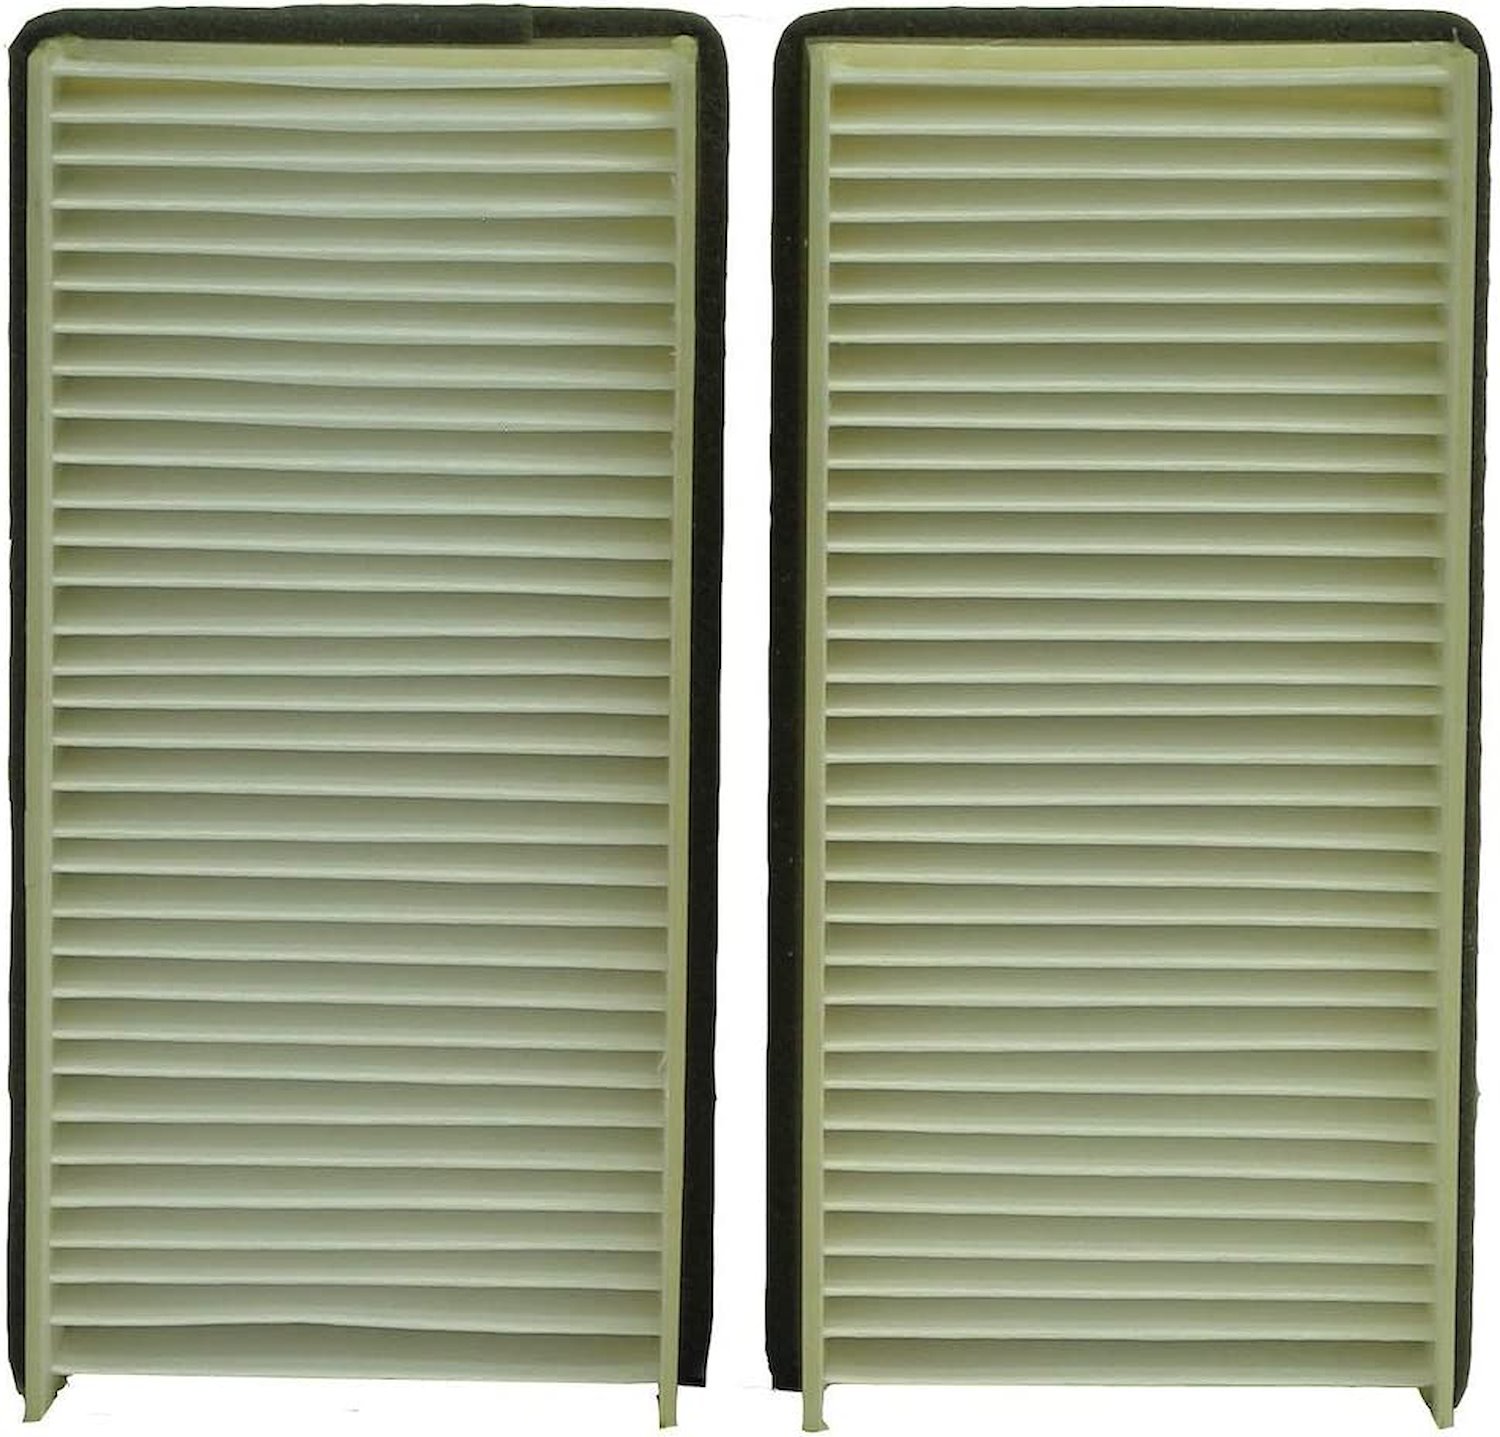 Cabin Air Filter Fits Select 1997-2000 Chevrolet, Oldsmobile,